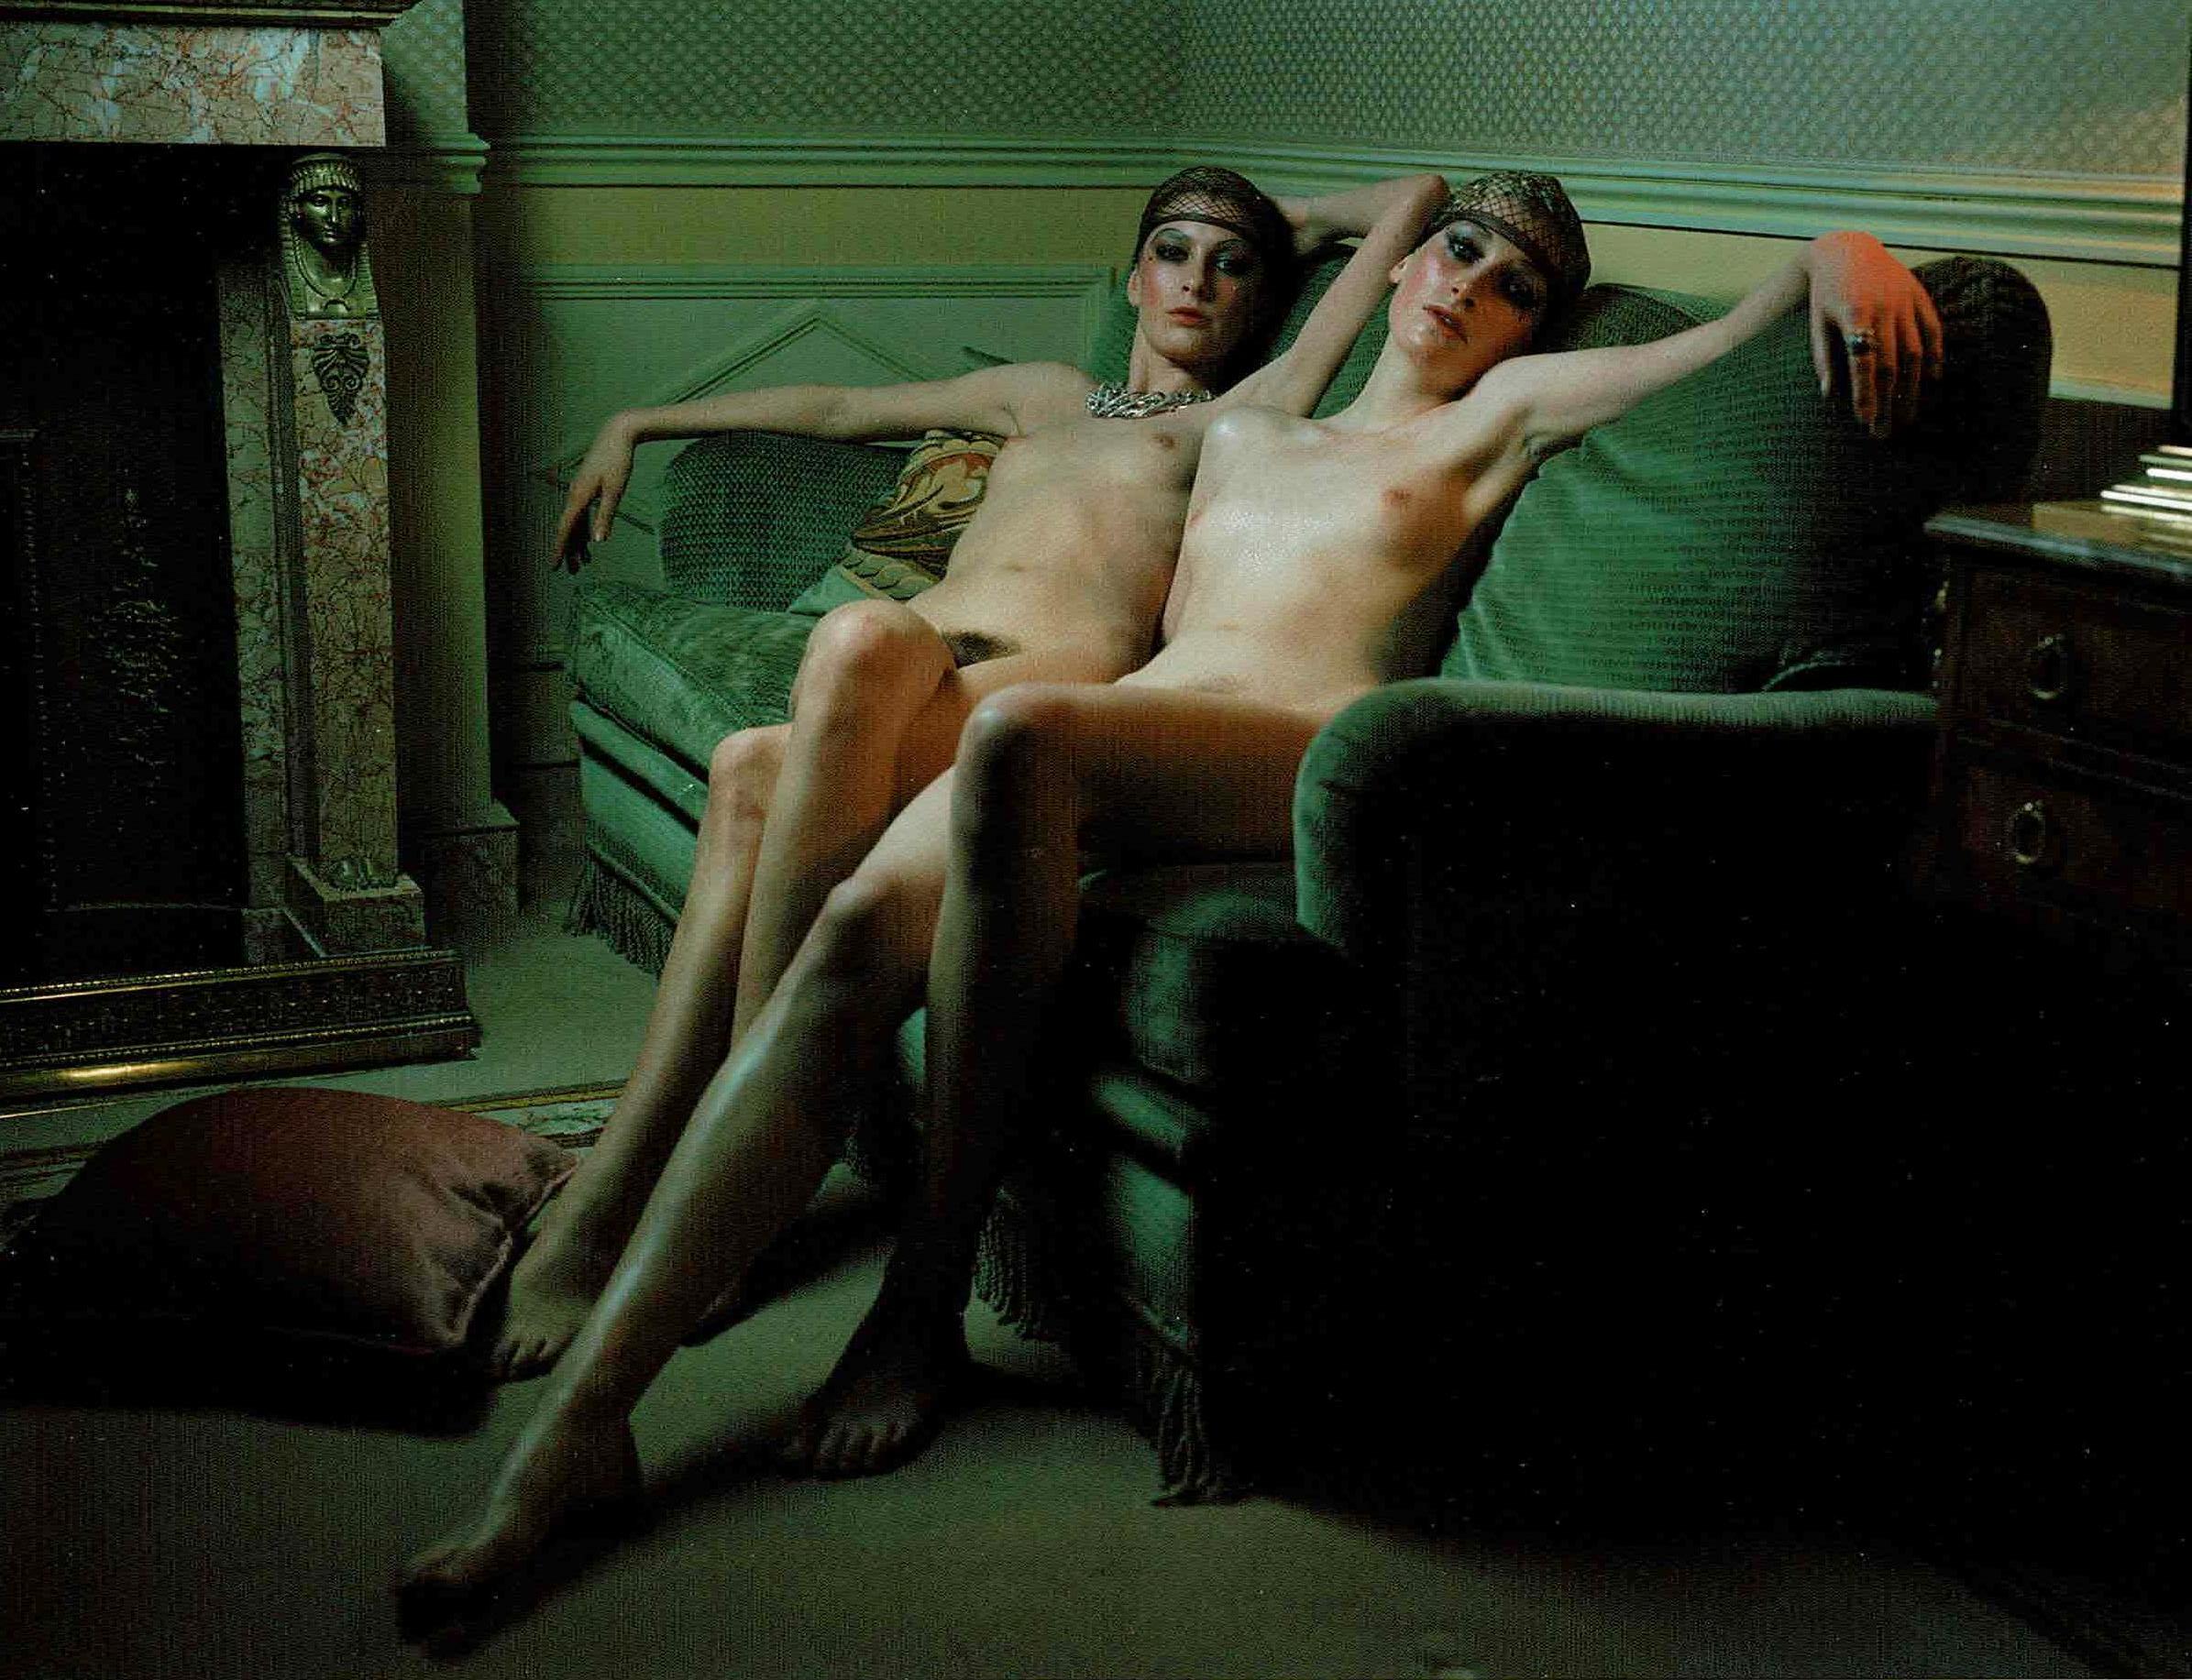 Chanel Story - two nude models on a green sofa, fine art photography, 1996